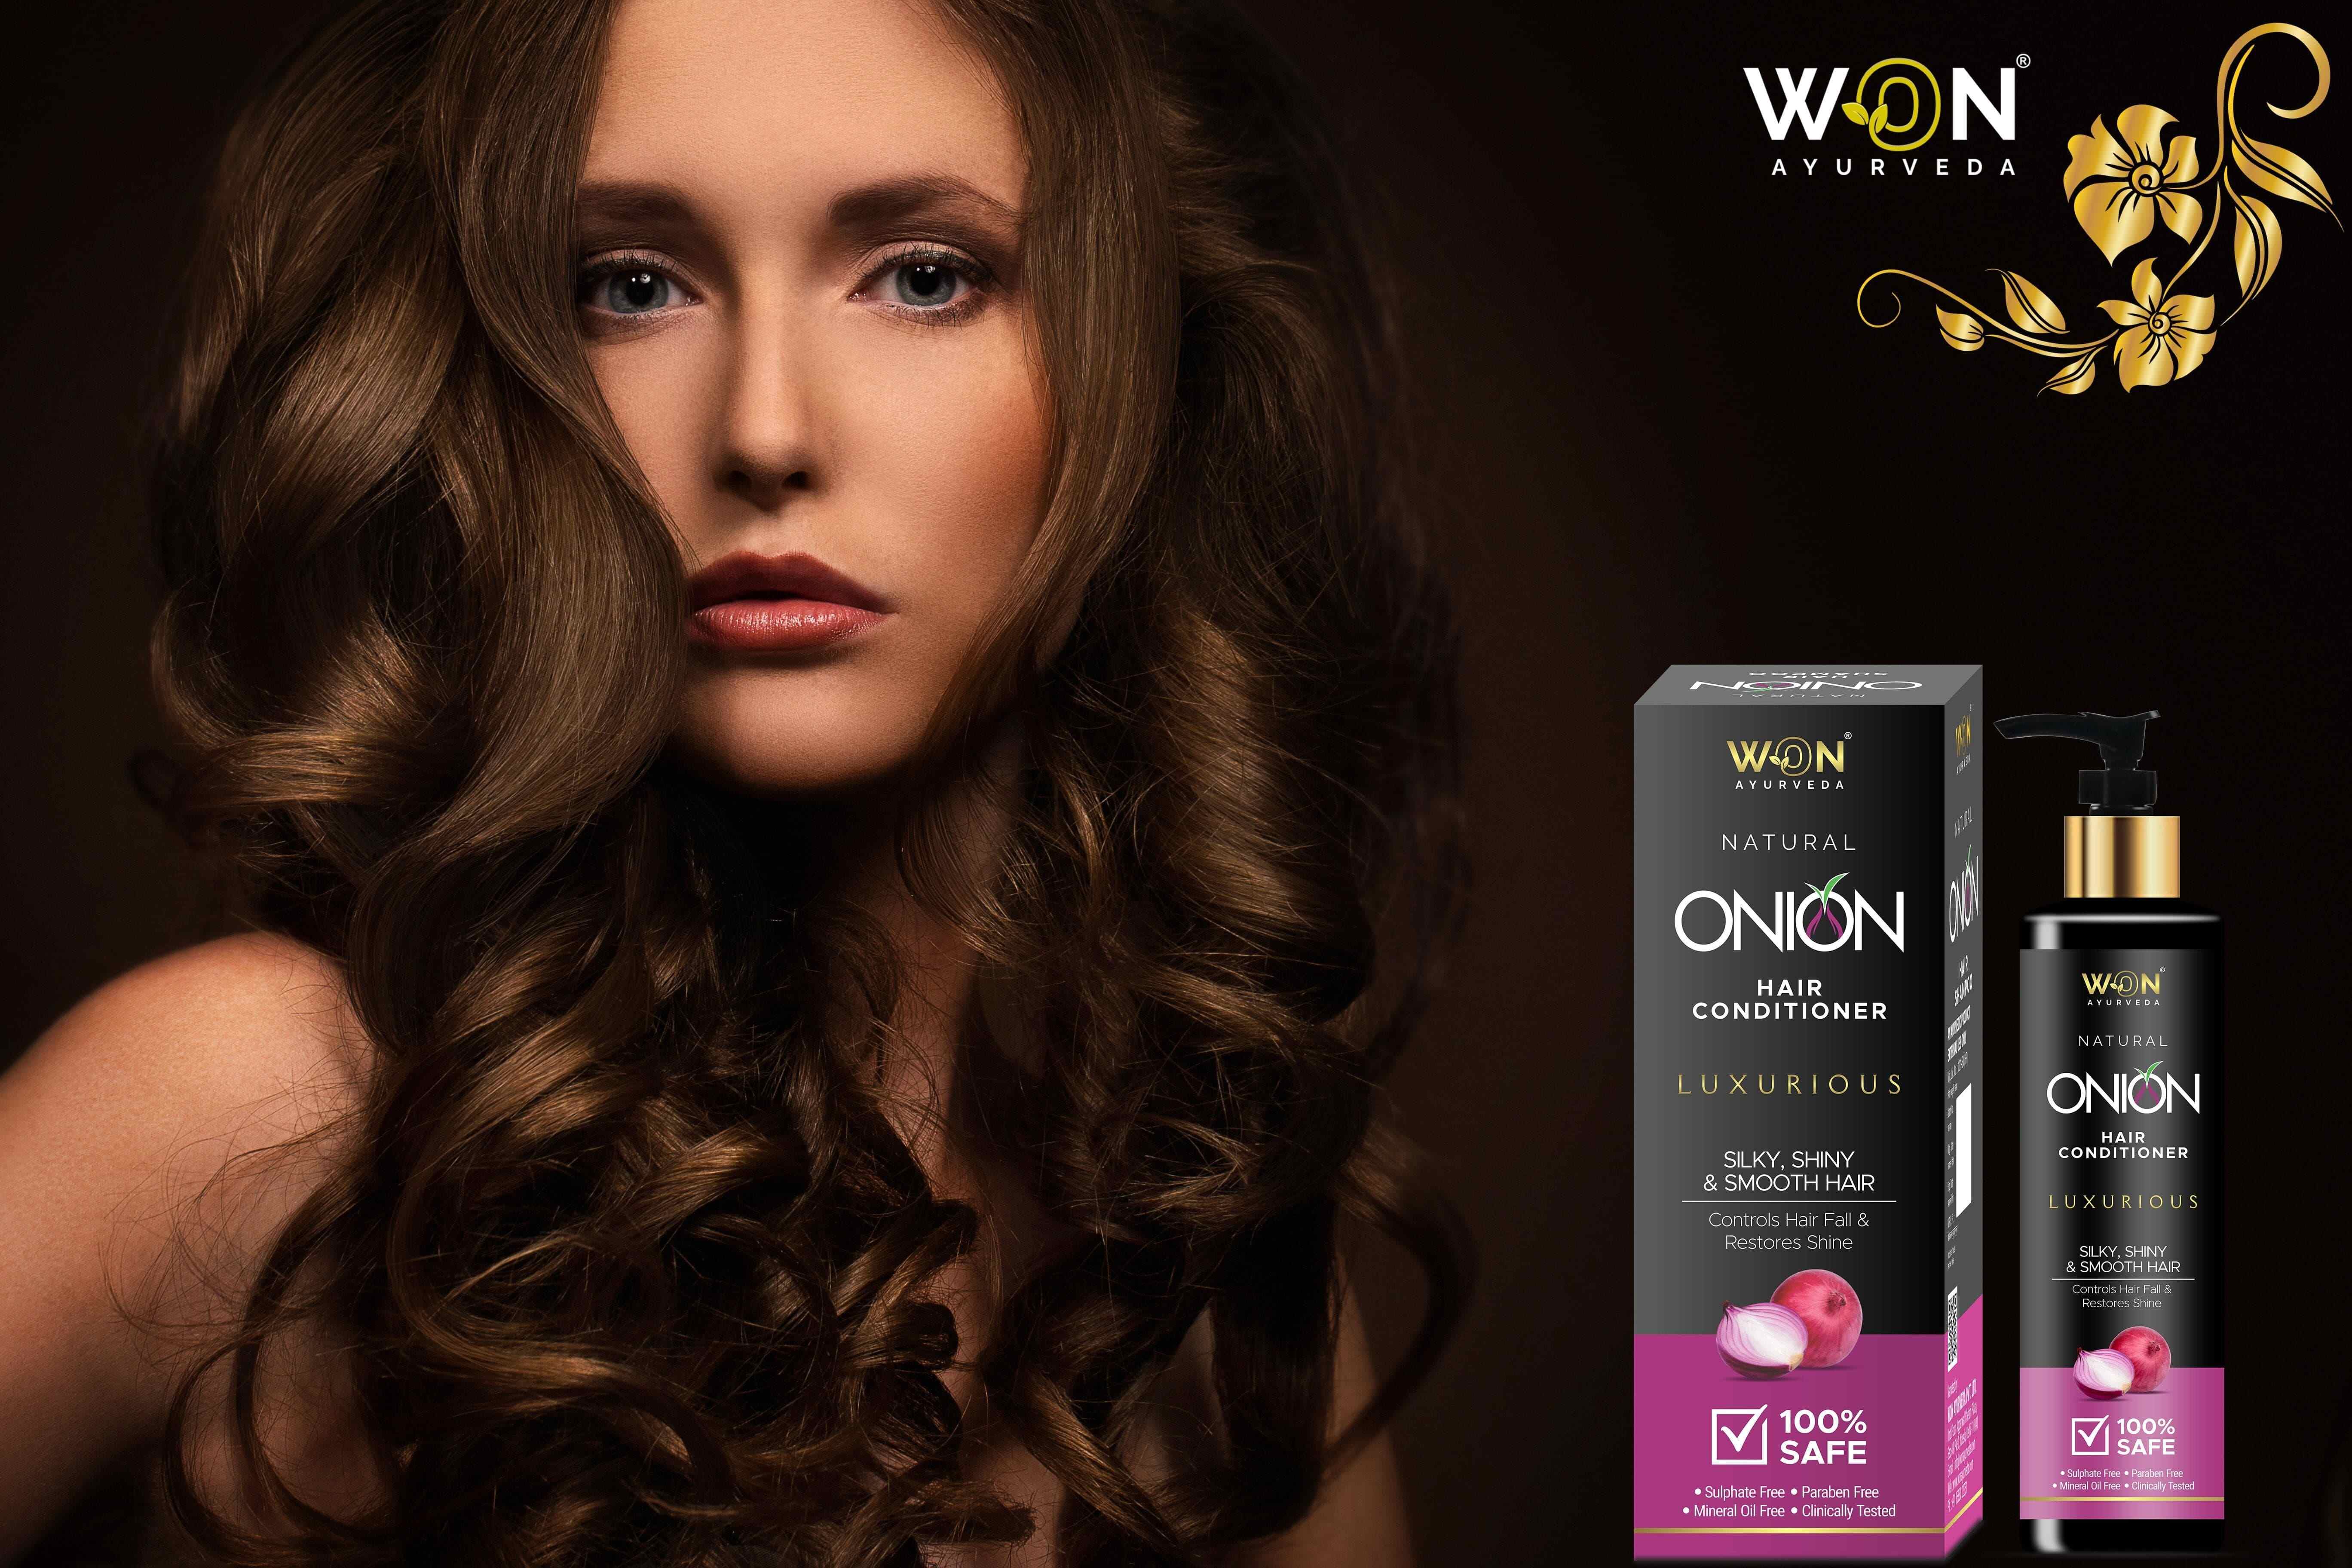 Won Ayurveda Natural Onion Conditioner for Hair Fall Control Reduces Hair Fall